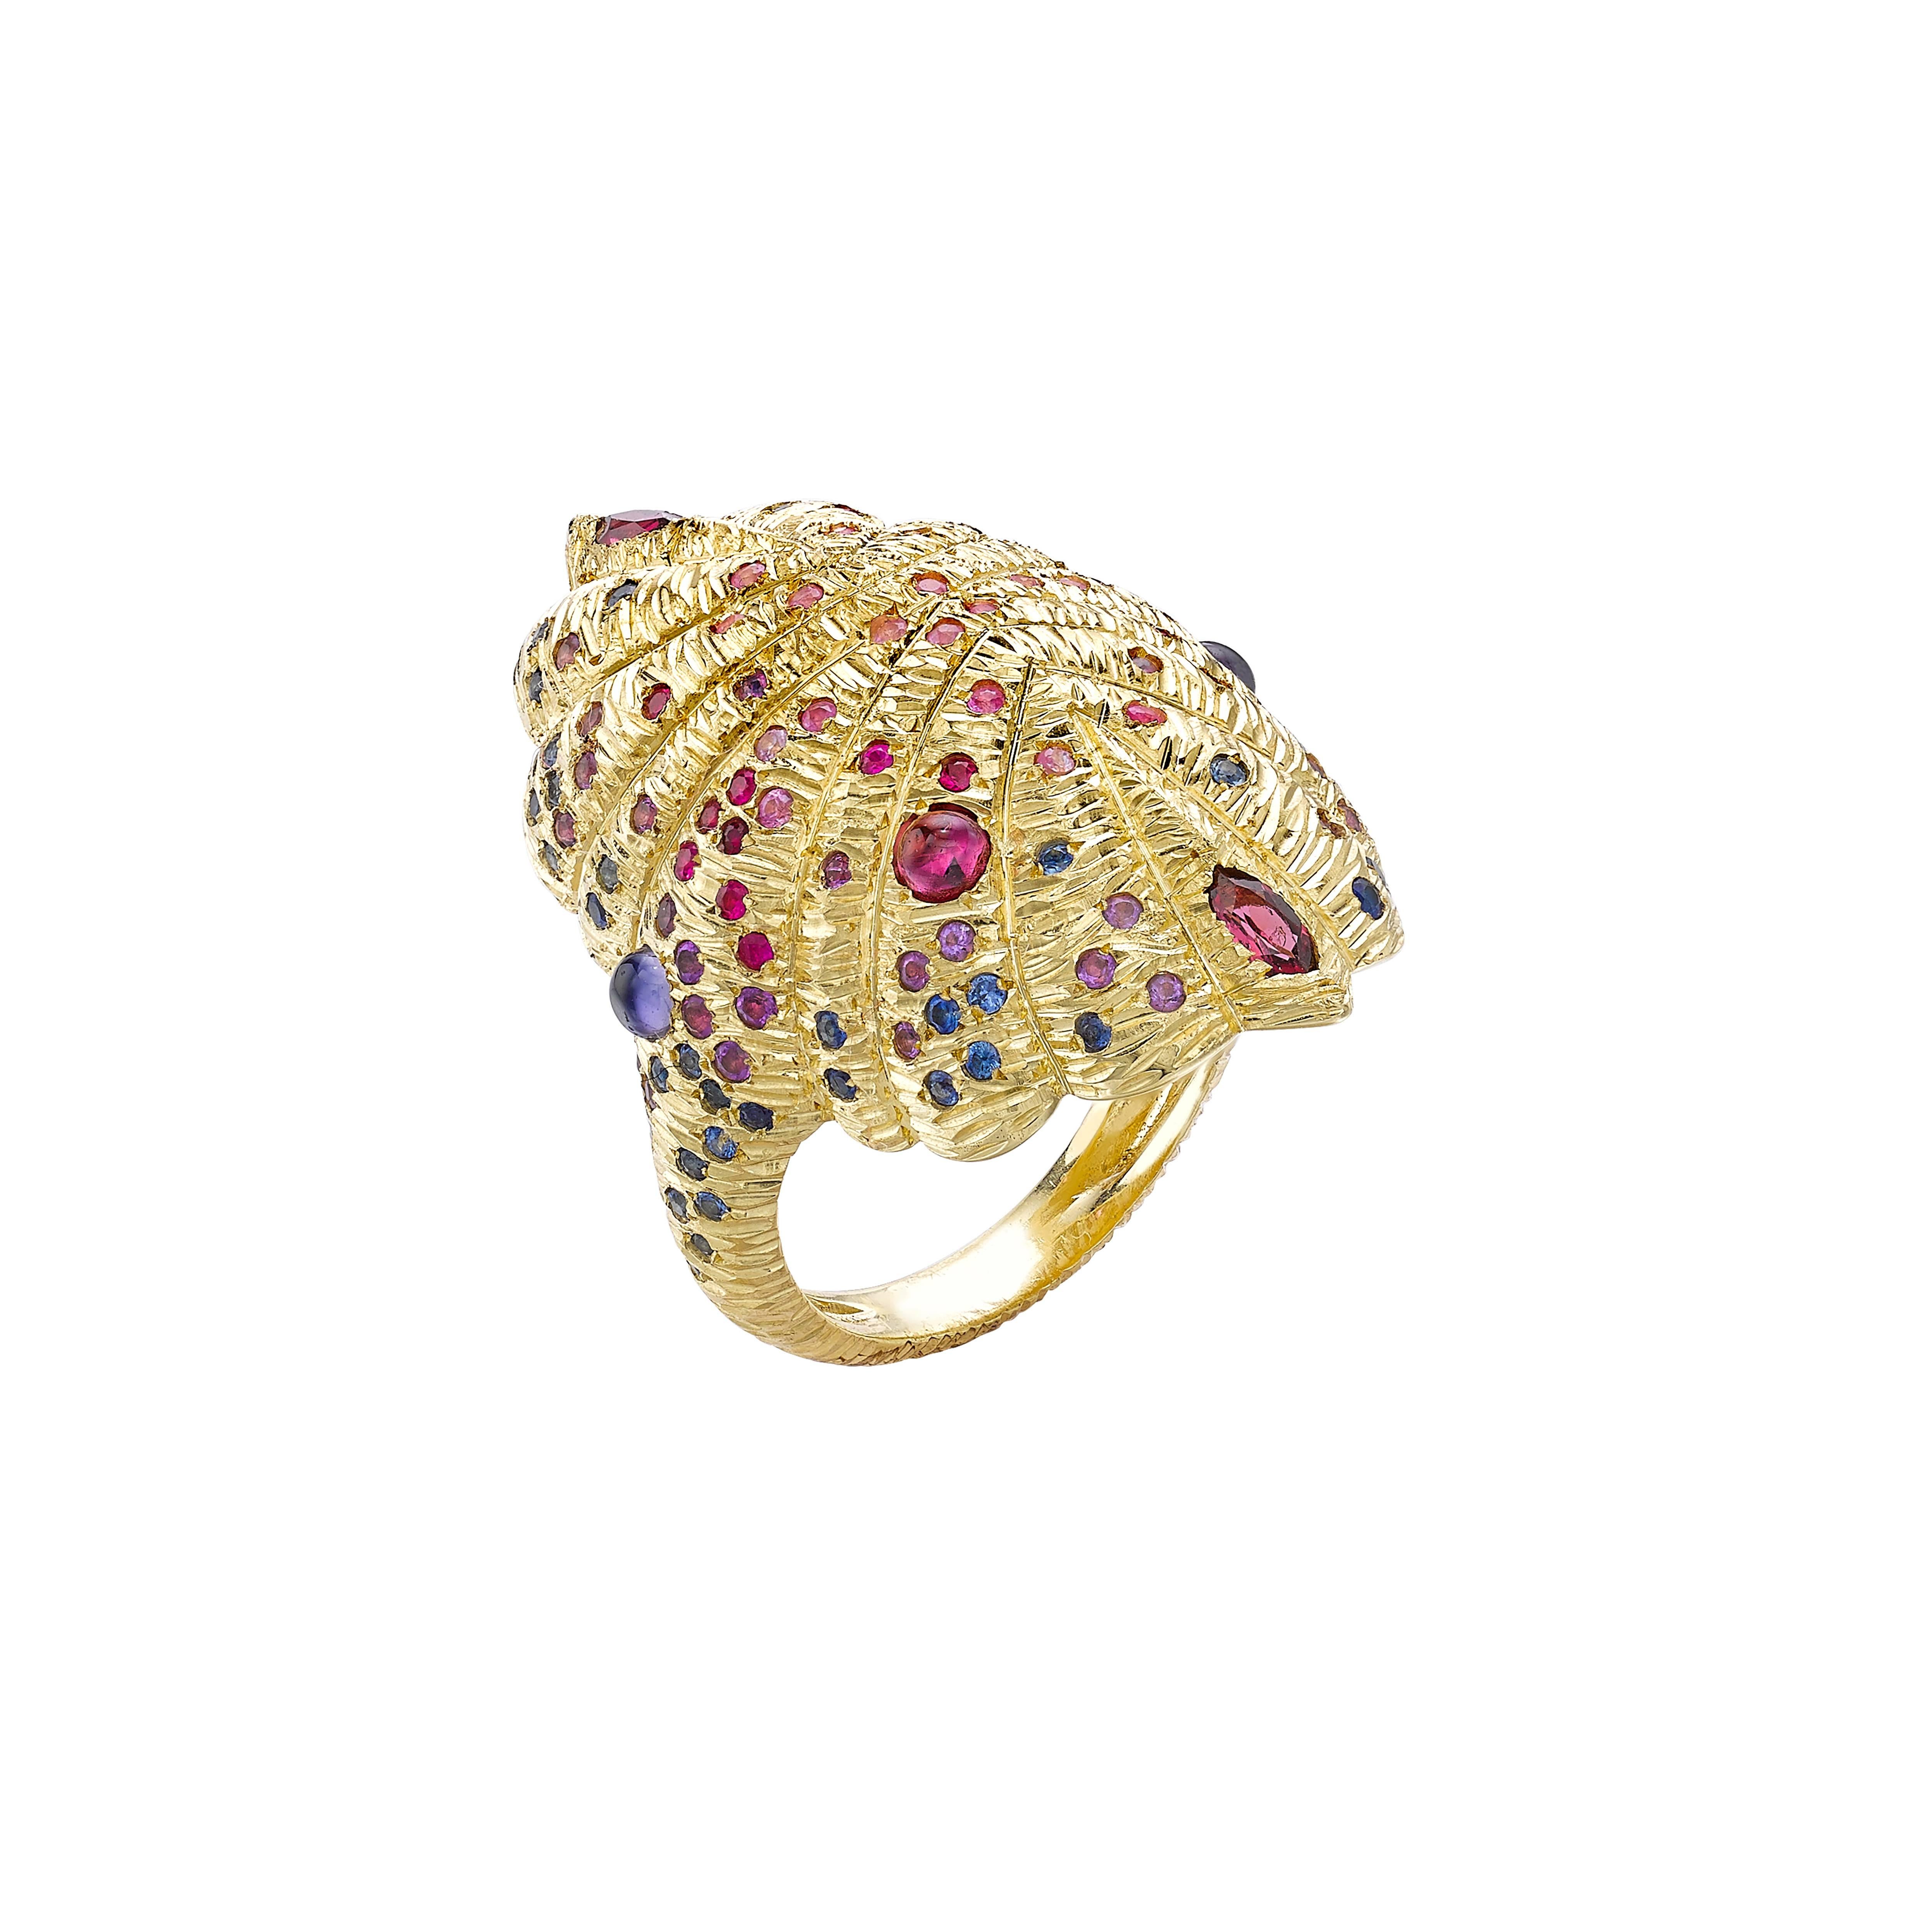 Ring size: 49, 50, 52 & 54
(Alternative sizes available on a made to order basis, with an estimated delivery time of 4-6 weeks)

18k Yellow Gold approx. 17gr, 48 Blue Sapphires 0.58ct, 34 Amethysts 0.37ct, 18 Rubies 0.24ct, 6 Pink Sapphires 0.10ct,